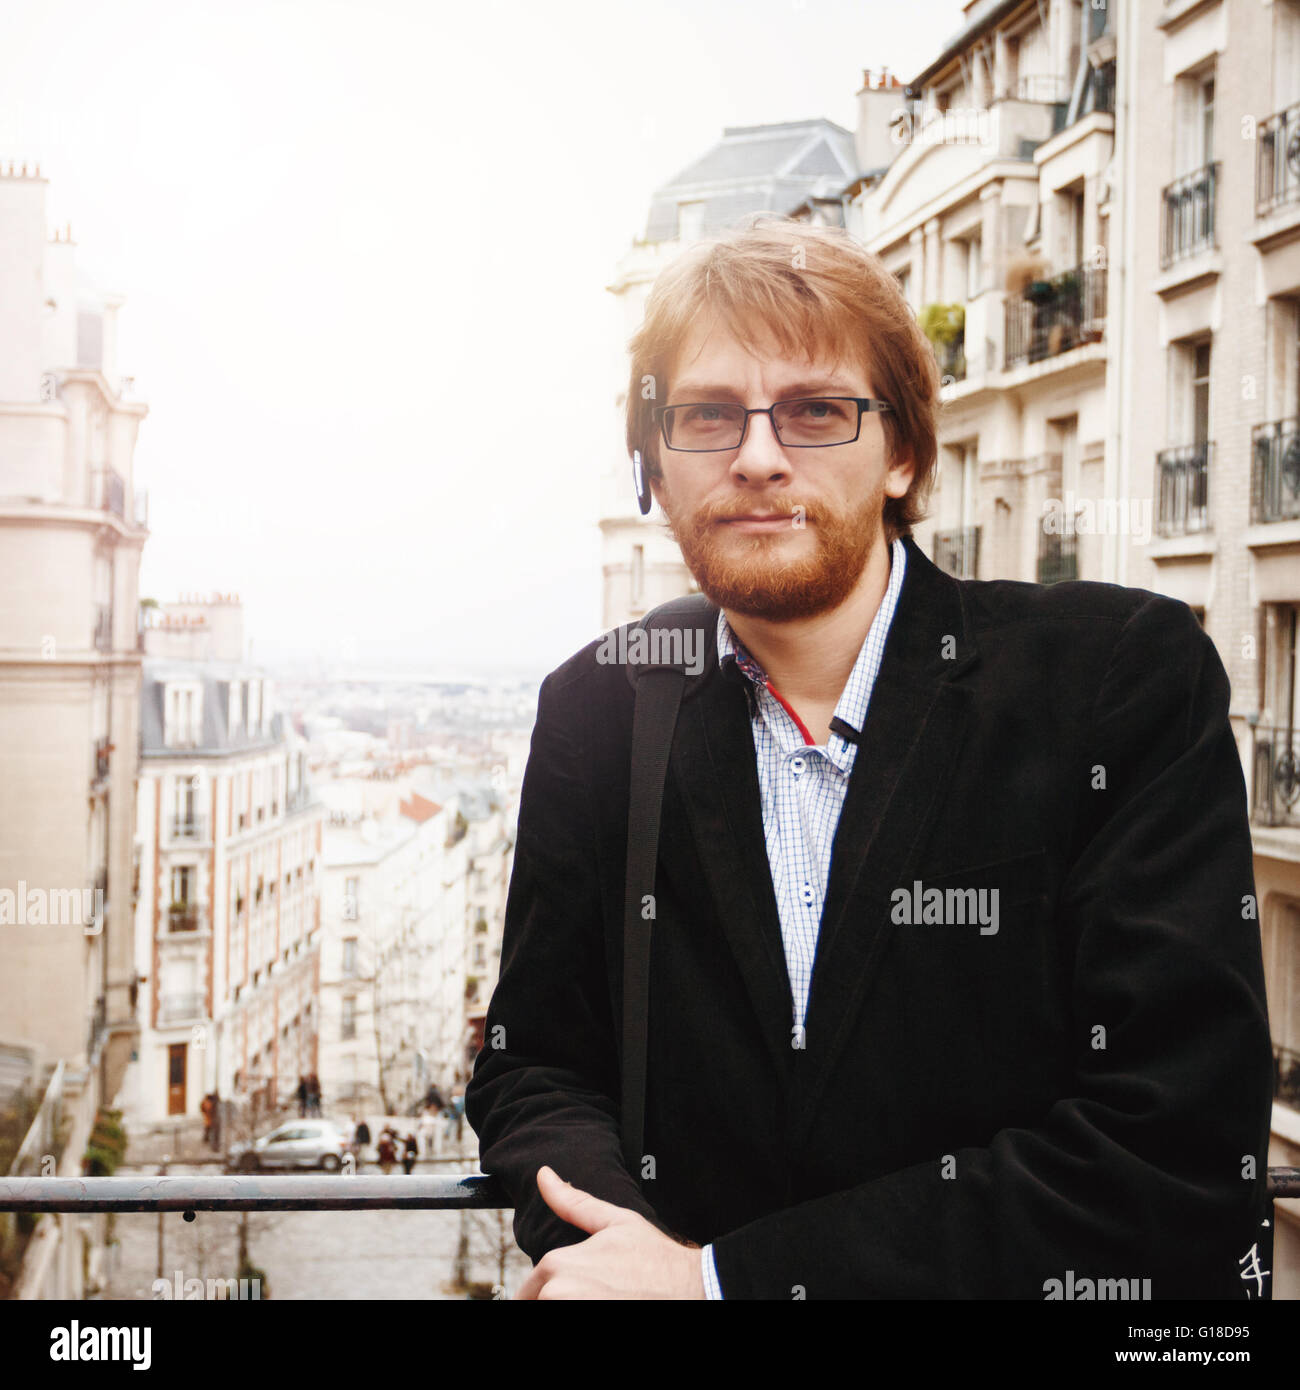 Handsome Calm Bearded Man Wearing Headset in Paris, France Looking in Camera. City Lifestyle. Image Toned. Stock Photo